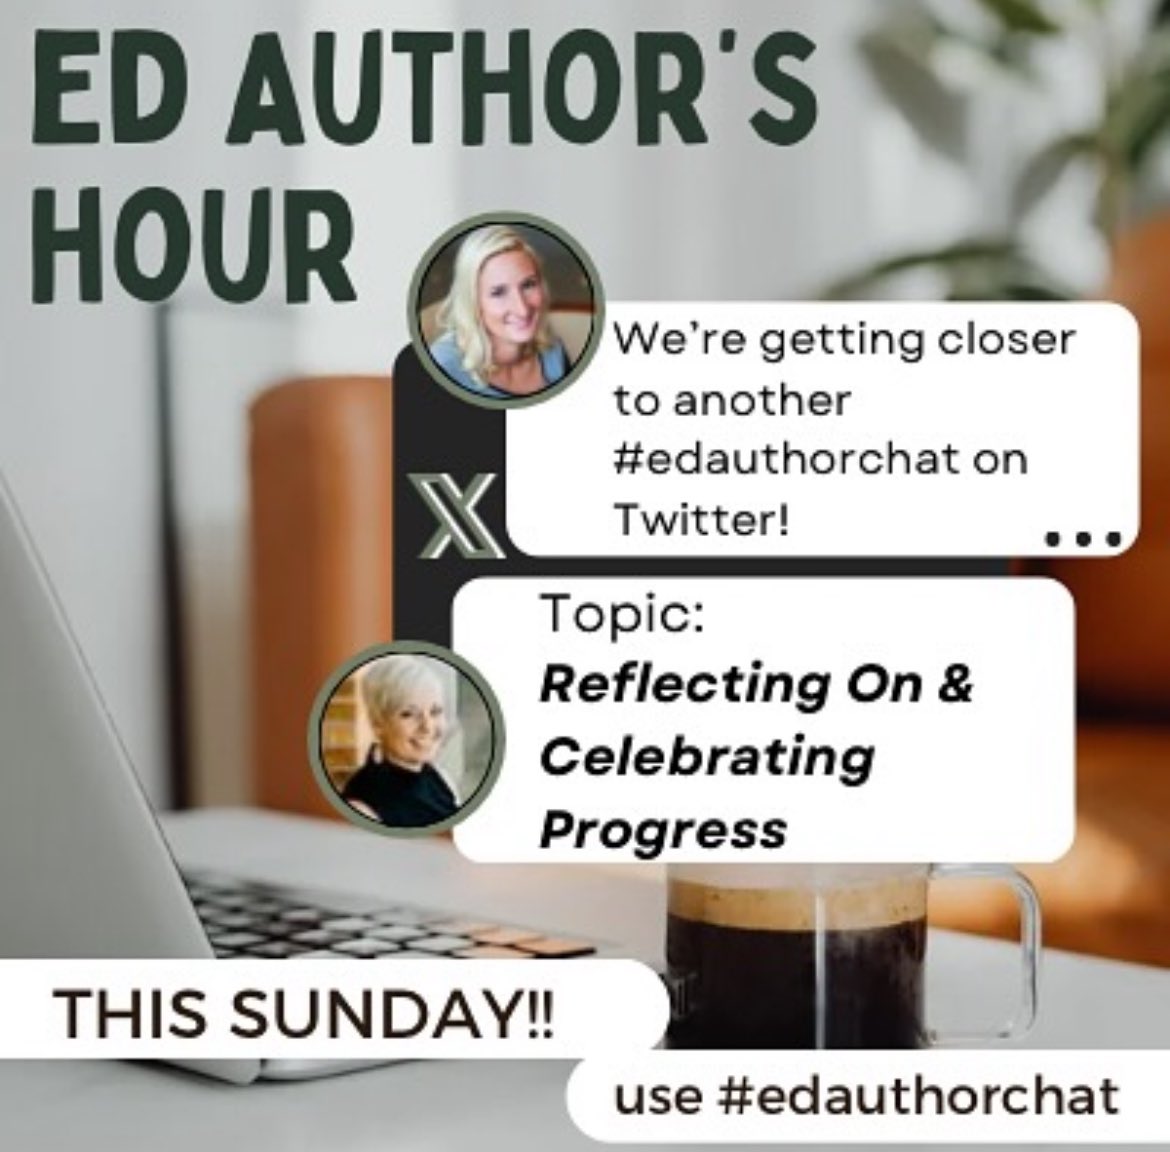 Tonight is our last chat of the season & we want to connect with as many writers/educators as possible. Come say 👋 & tell us what you’ve been working on 📝6pm CST

#edchat #educoach #edauthorchat